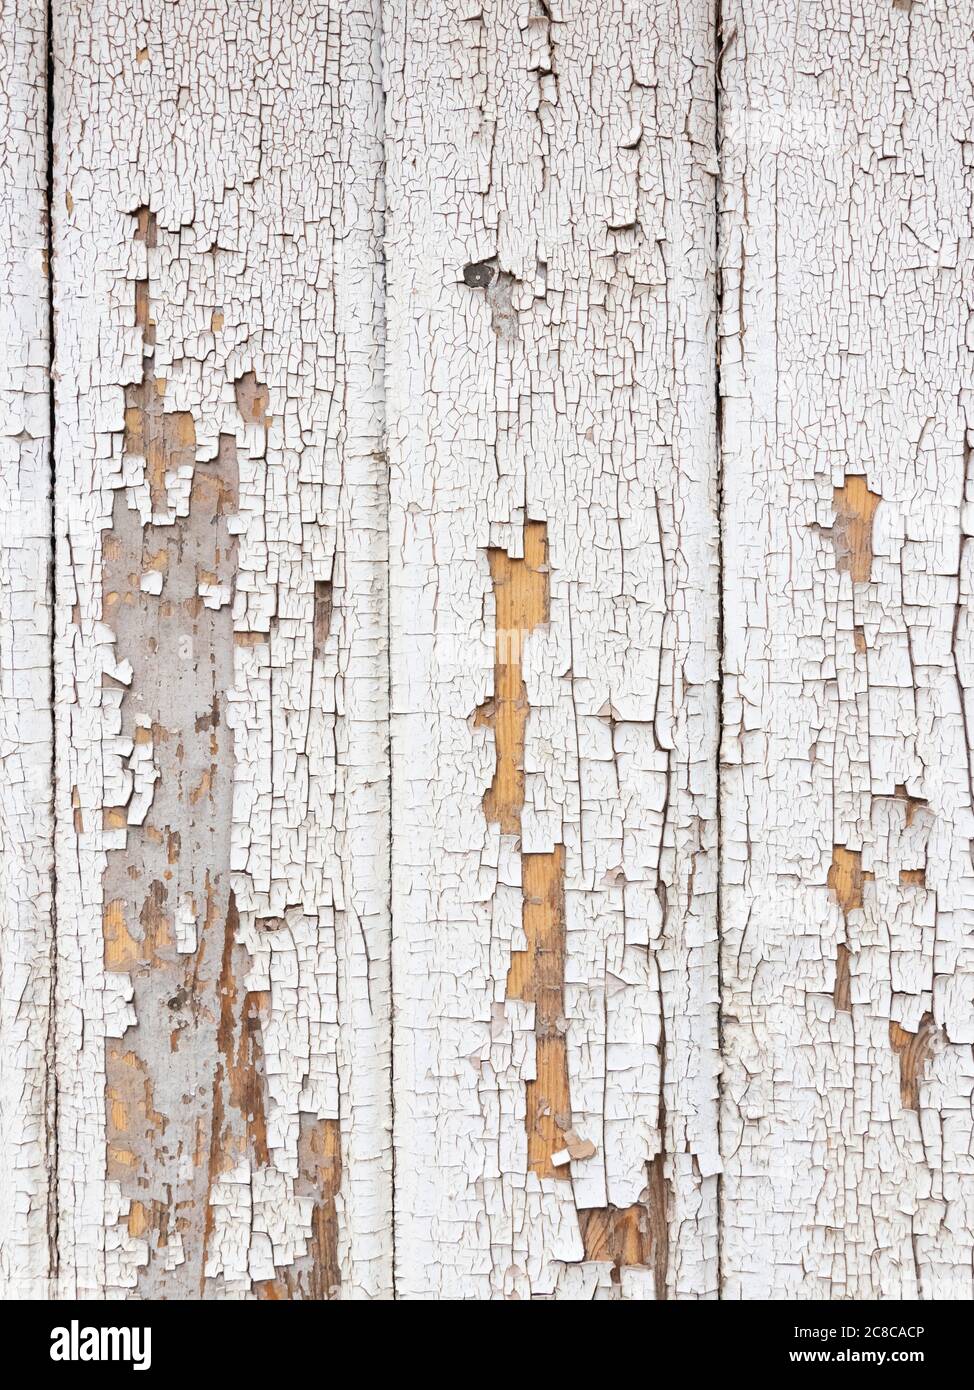 background wooden board with cracked peeling white paint, texture Stock Photo